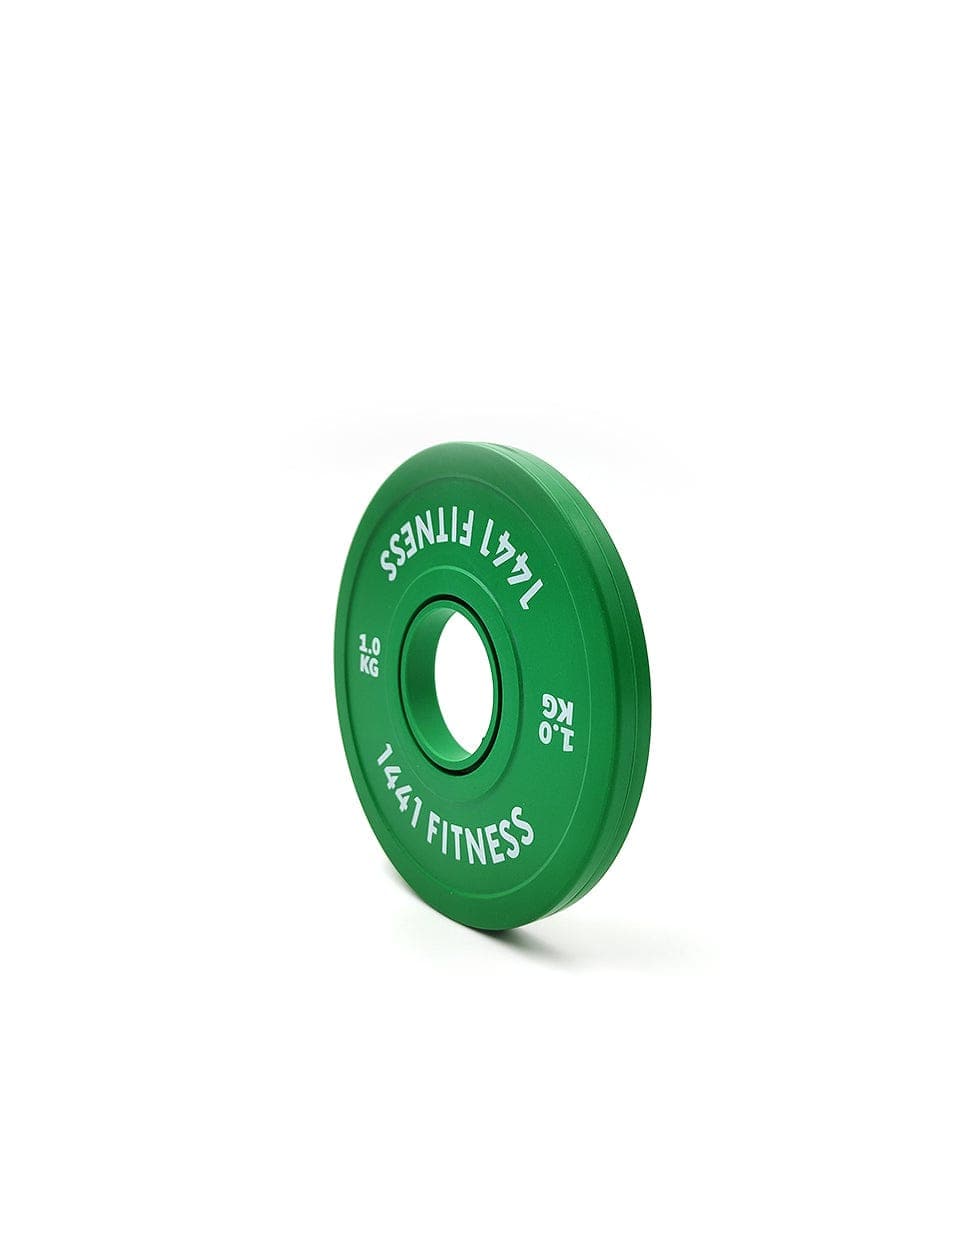 PRSAE Plates & Bars 1441 Fitness Fractional Bumper Weight Plates 0.5 kg to 2.5 Kg - Sold as Per Piece